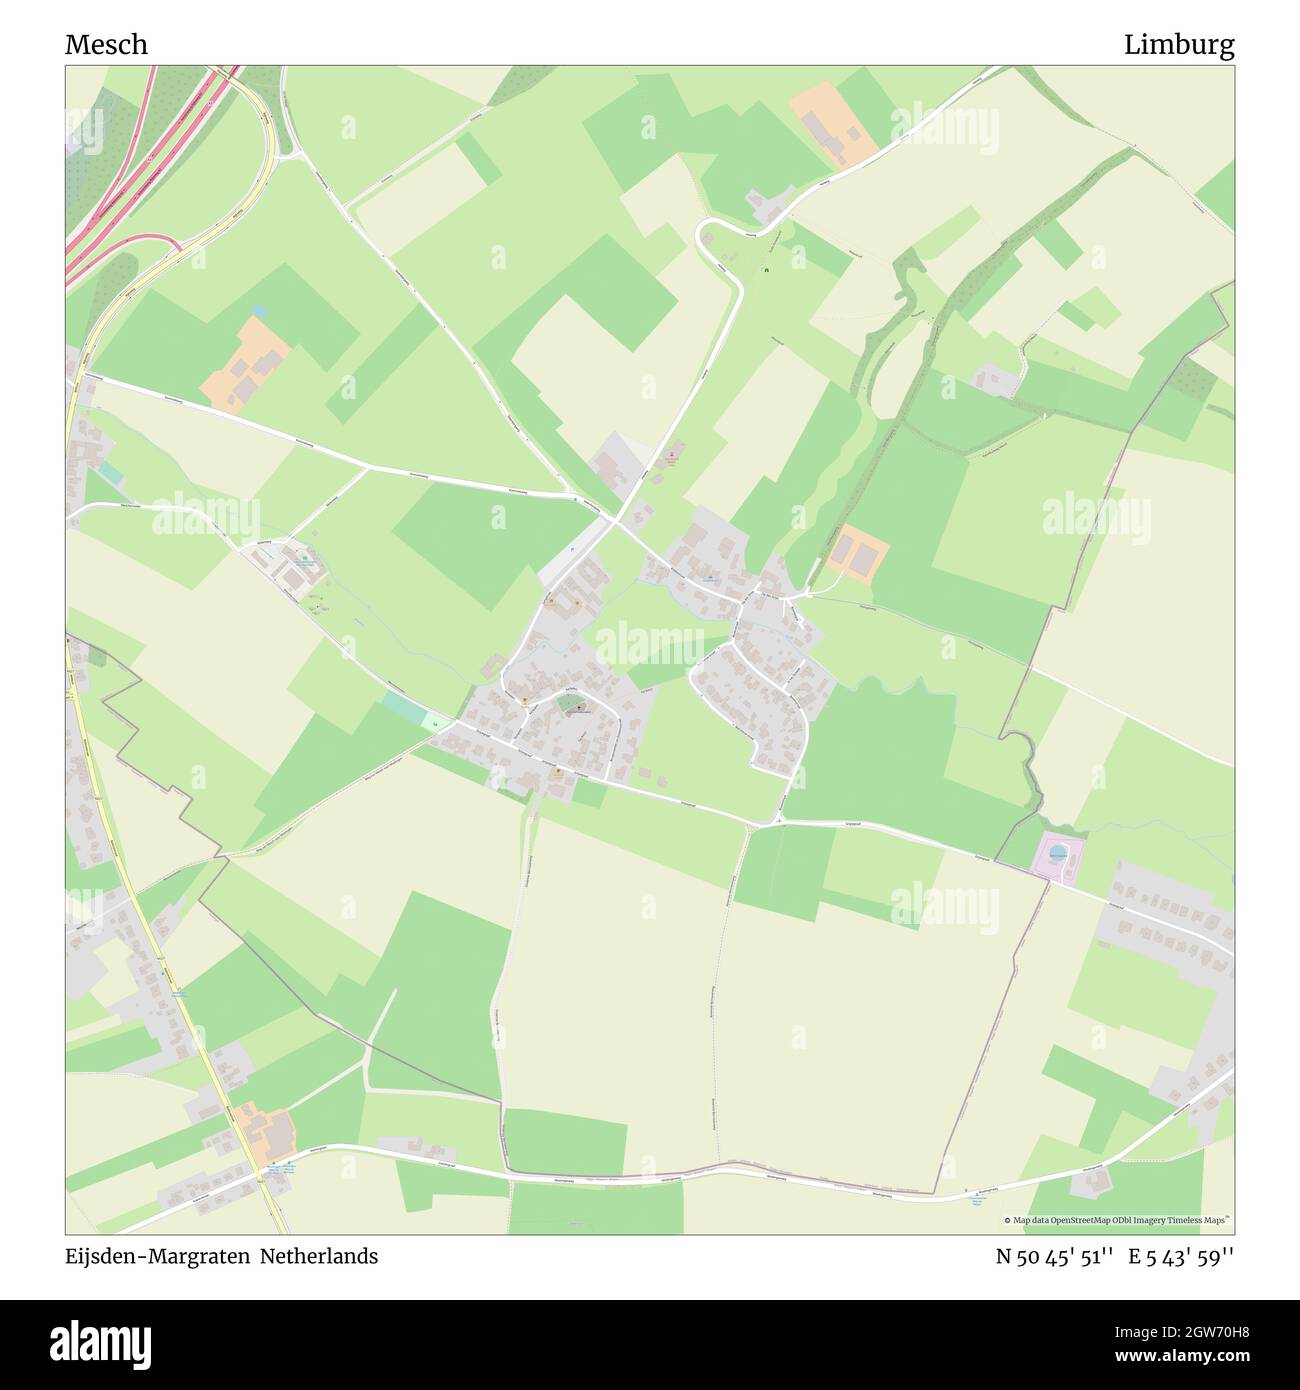 Mesch, Eijsden-Margraten, Netherlands, Limburg, N 50 45' 51'', E 5 43' 59'', map, Timeless Map published in 2021. Travelers, explorers and adventurers like Florence Nightingale, David Livingstone, Ernest Shackleton, Lewis and Clark and Sherlock Holmes relied on maps to plan travels to the world's most remote corners, Timeless Maps is mapping most locations on the globe, showing the achievement of great dreams Stock Photo